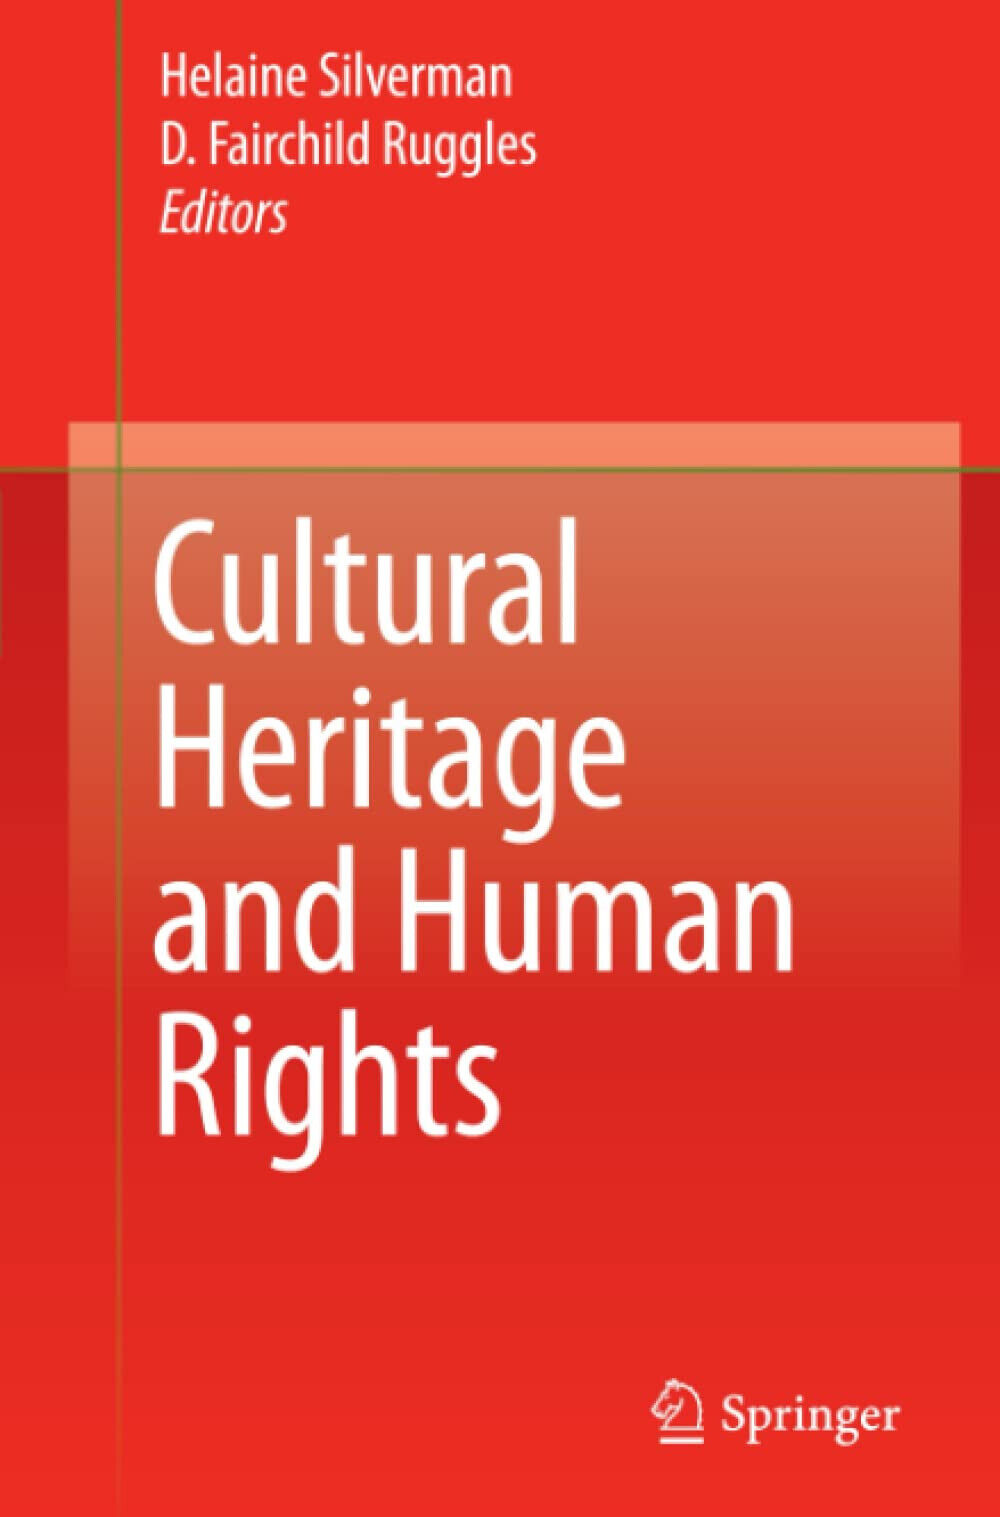 Cultural Heritage and Human Rights - Helaine Silverman - Springer, 2008 libro usato